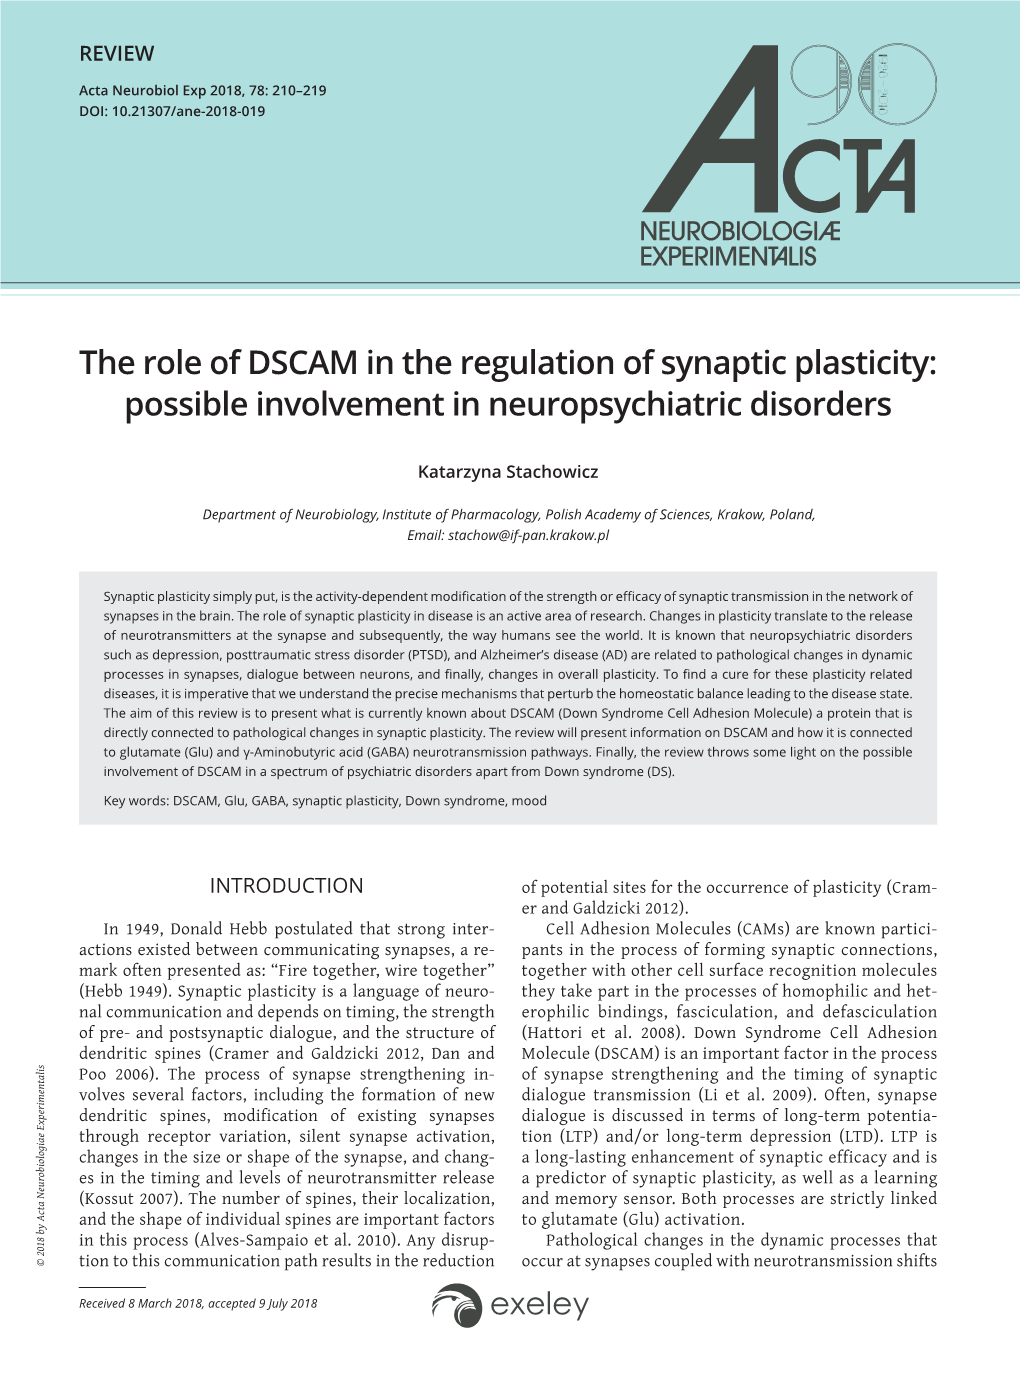 The Role of DSCAM in the Regulation